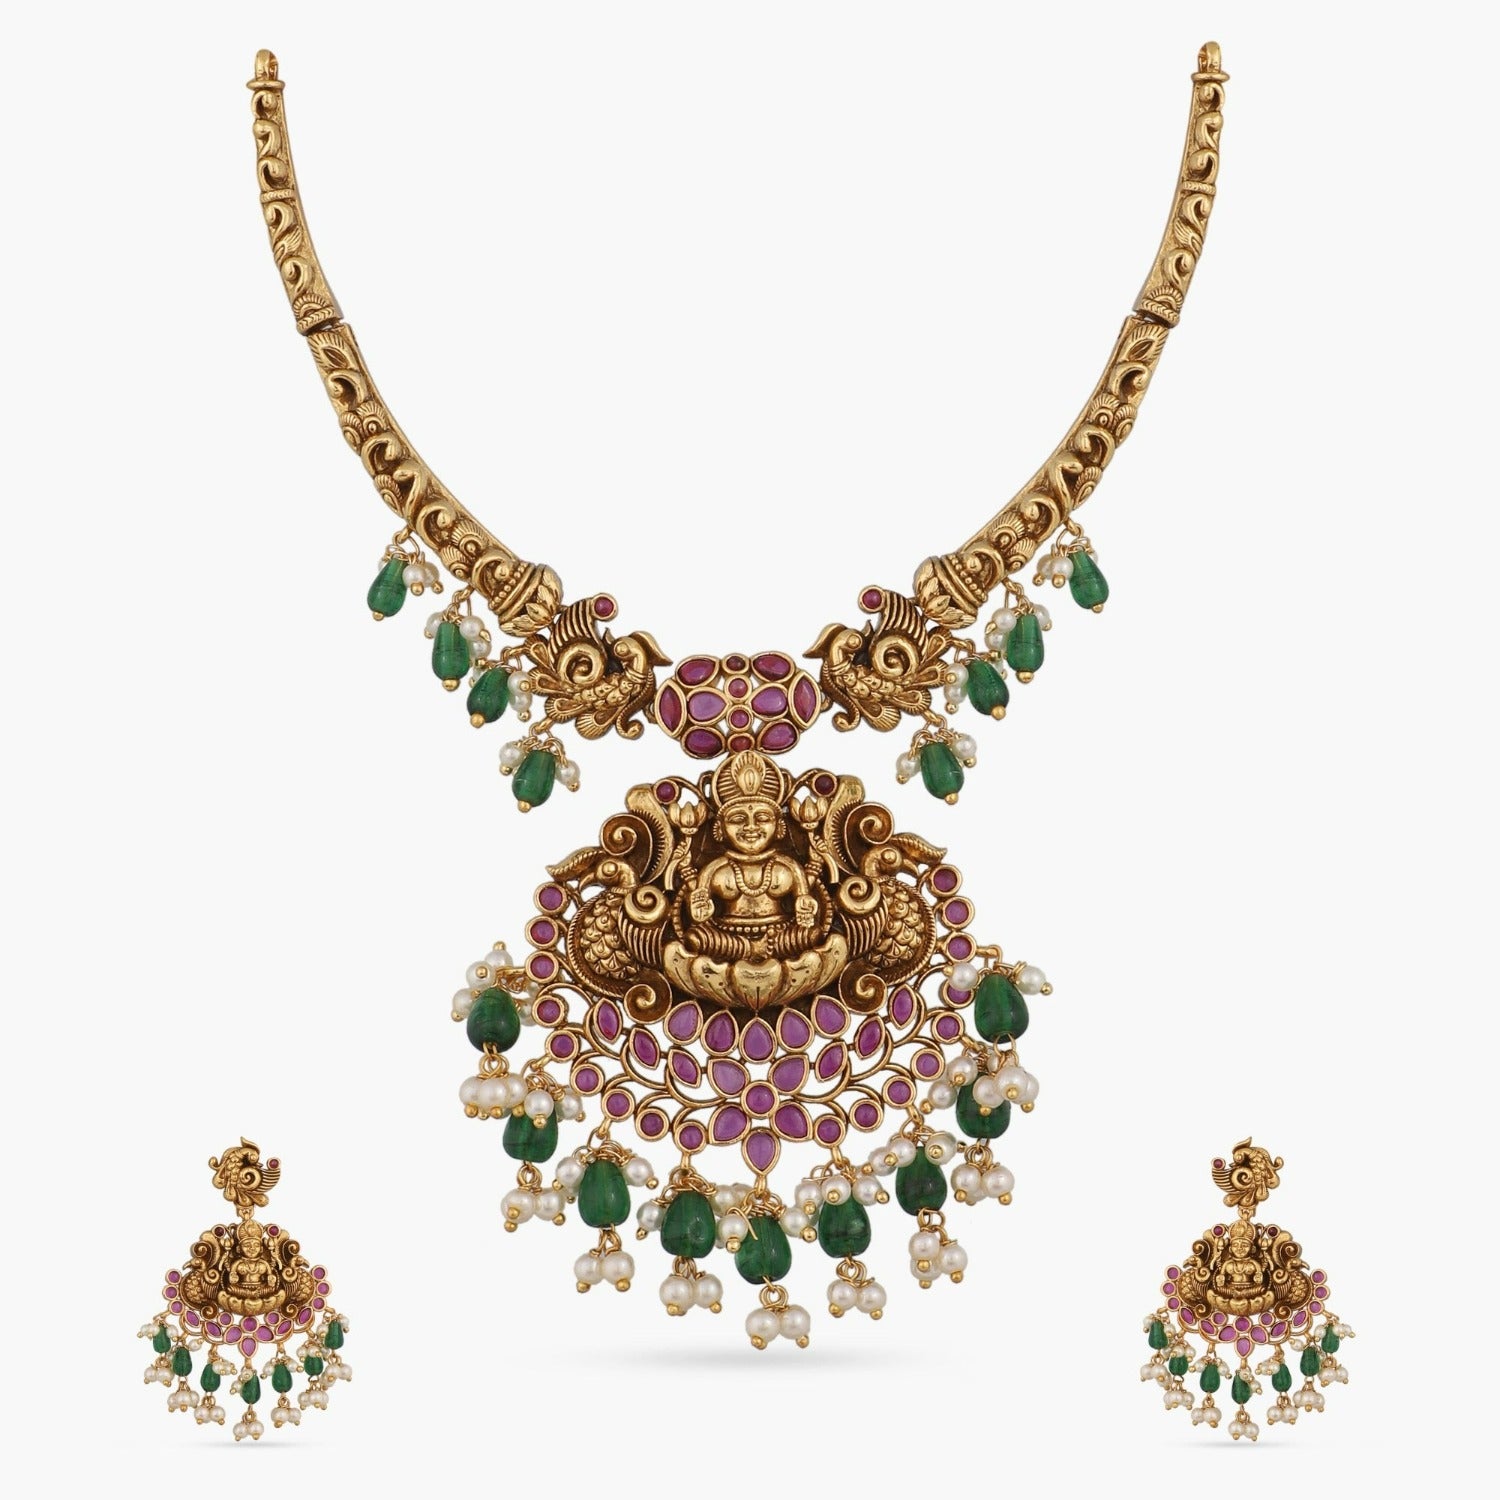 Antique Gold Necklace - Indian Jewellery Designs